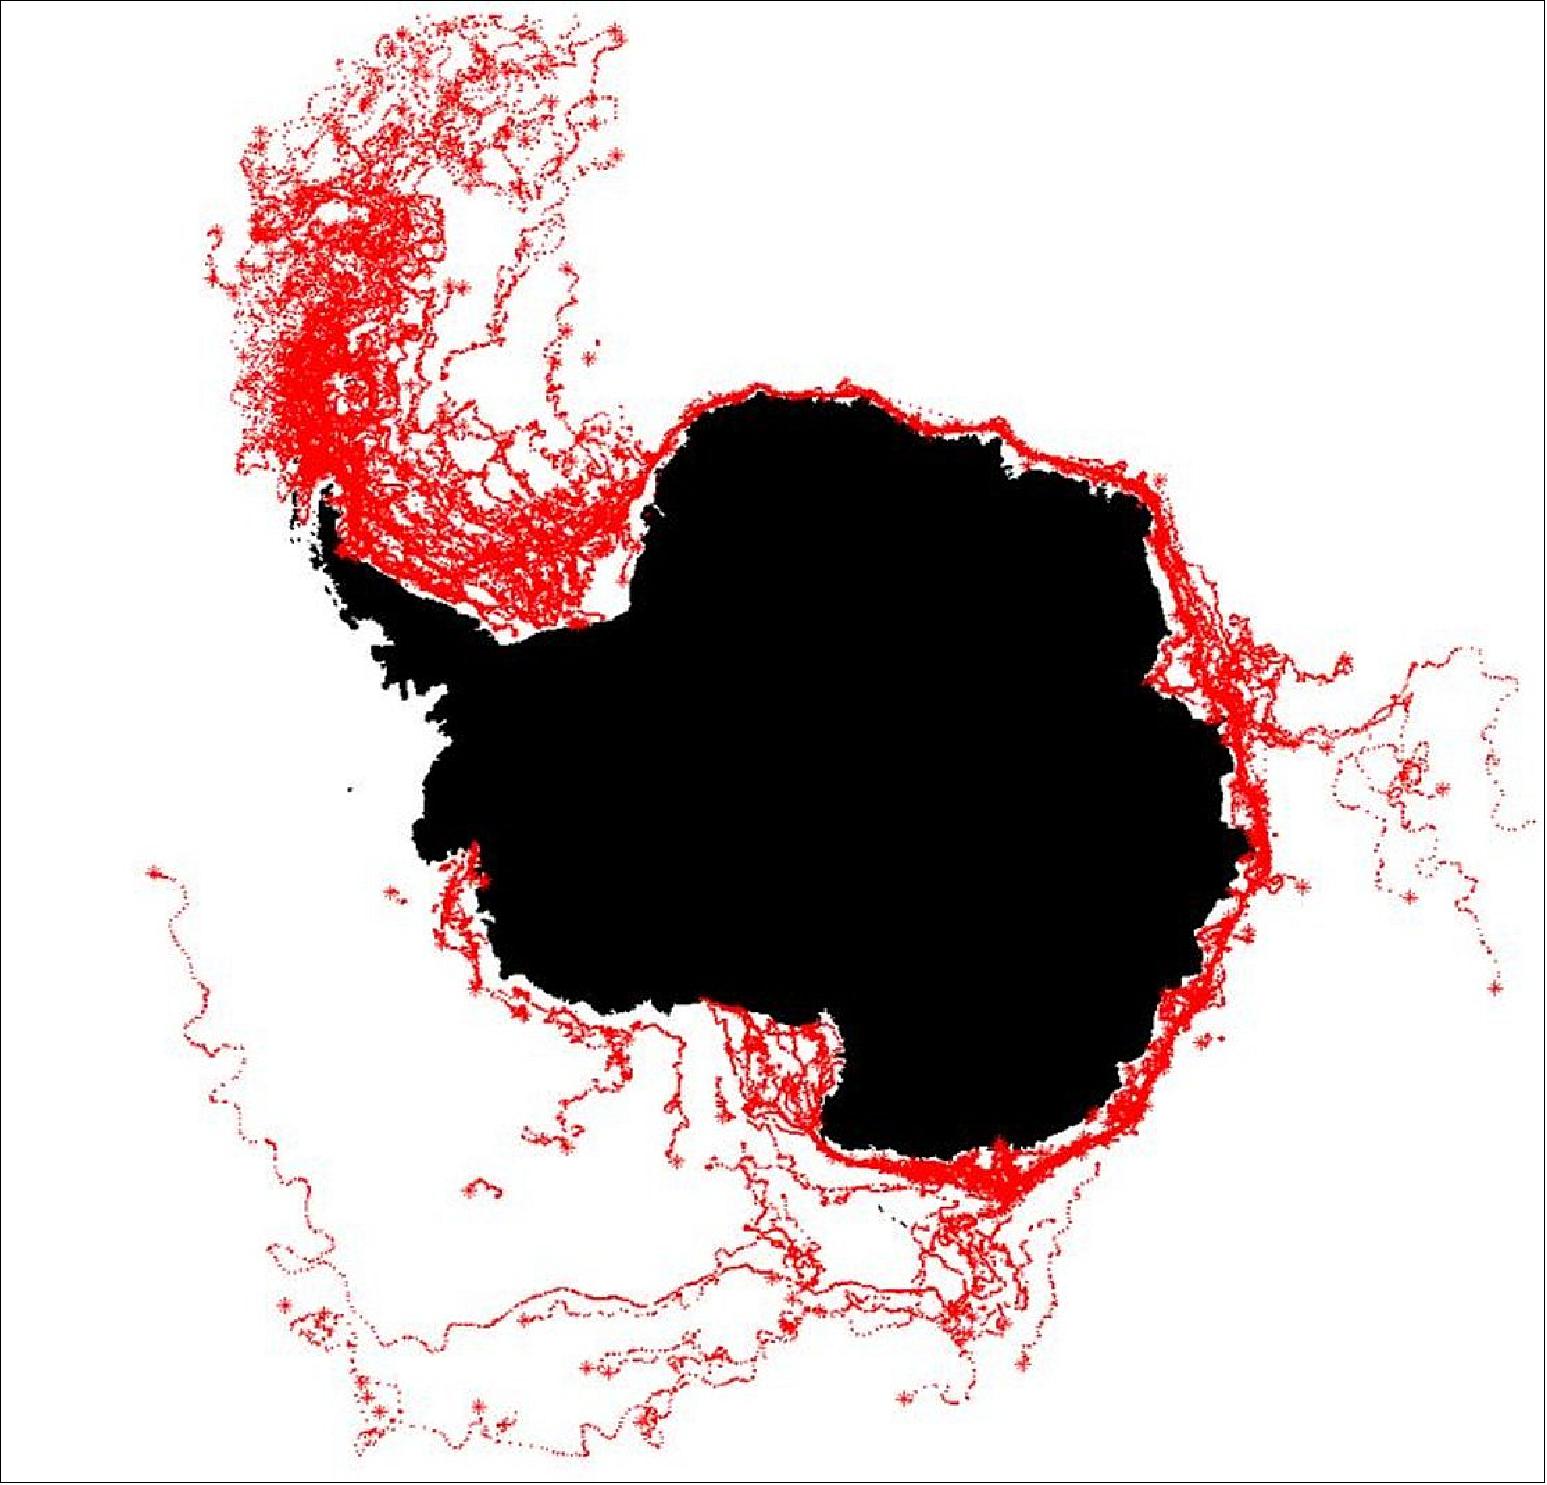 Figure 51: Six different satellite scatterometers are used to track icebergs around Antarctica. The image shows iceberg tracks from 1999 to 2010 (image credit: Scatterometer Climate Record Pathfinder) 59)